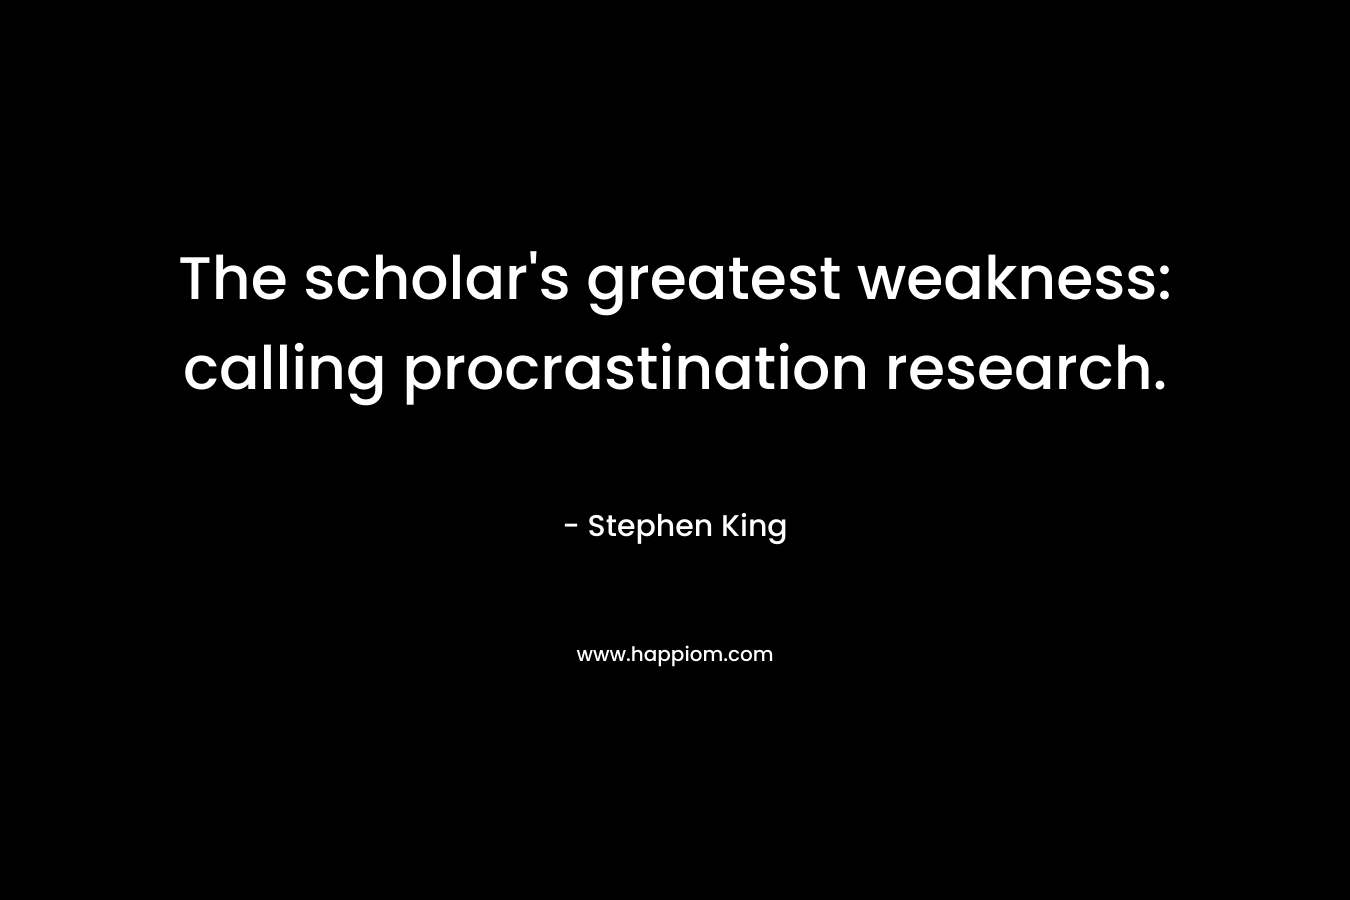 The scholar’s greatest weakness: calling procrastination research. – Stephen King